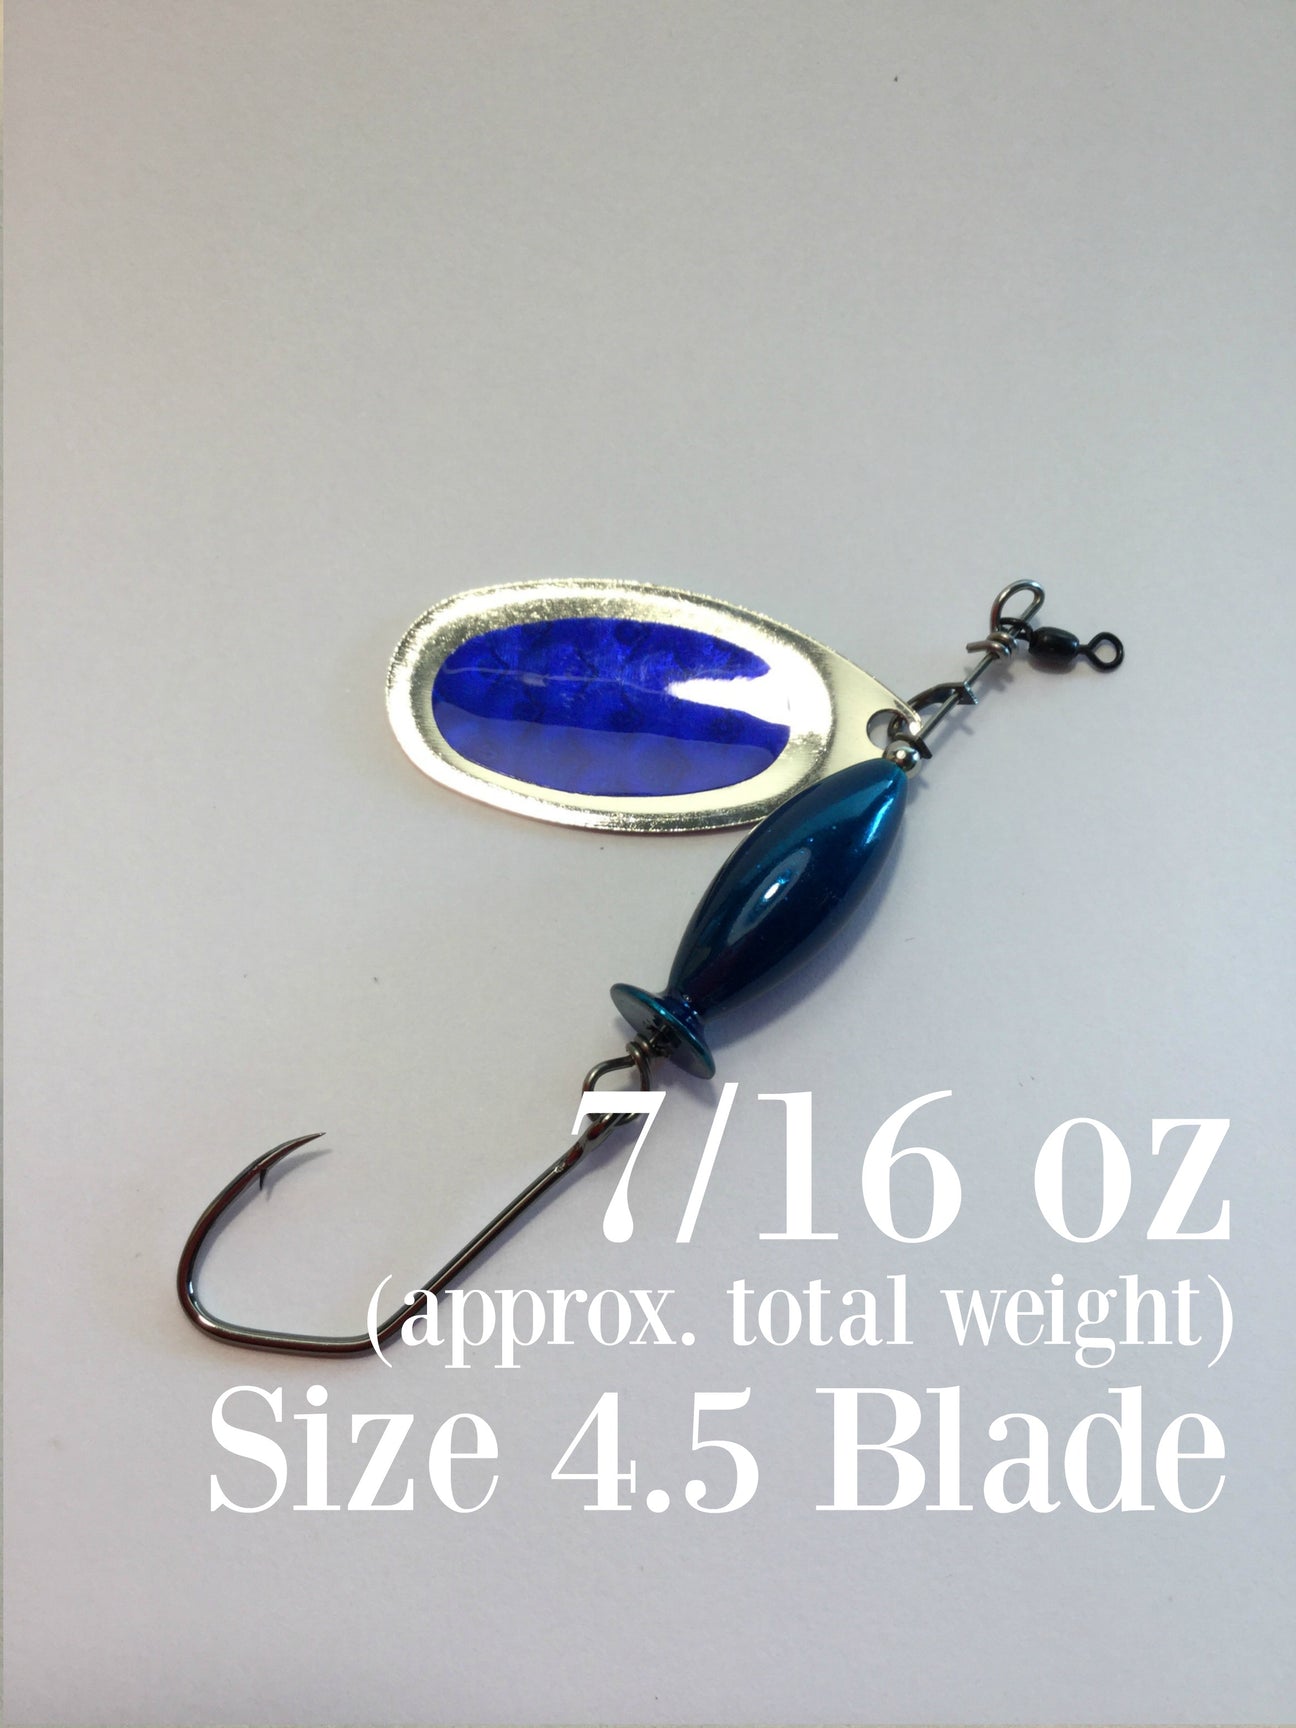 CHROME MAGNET: Blue Body, Silver Blade with Blue Flash Weighted Spinne